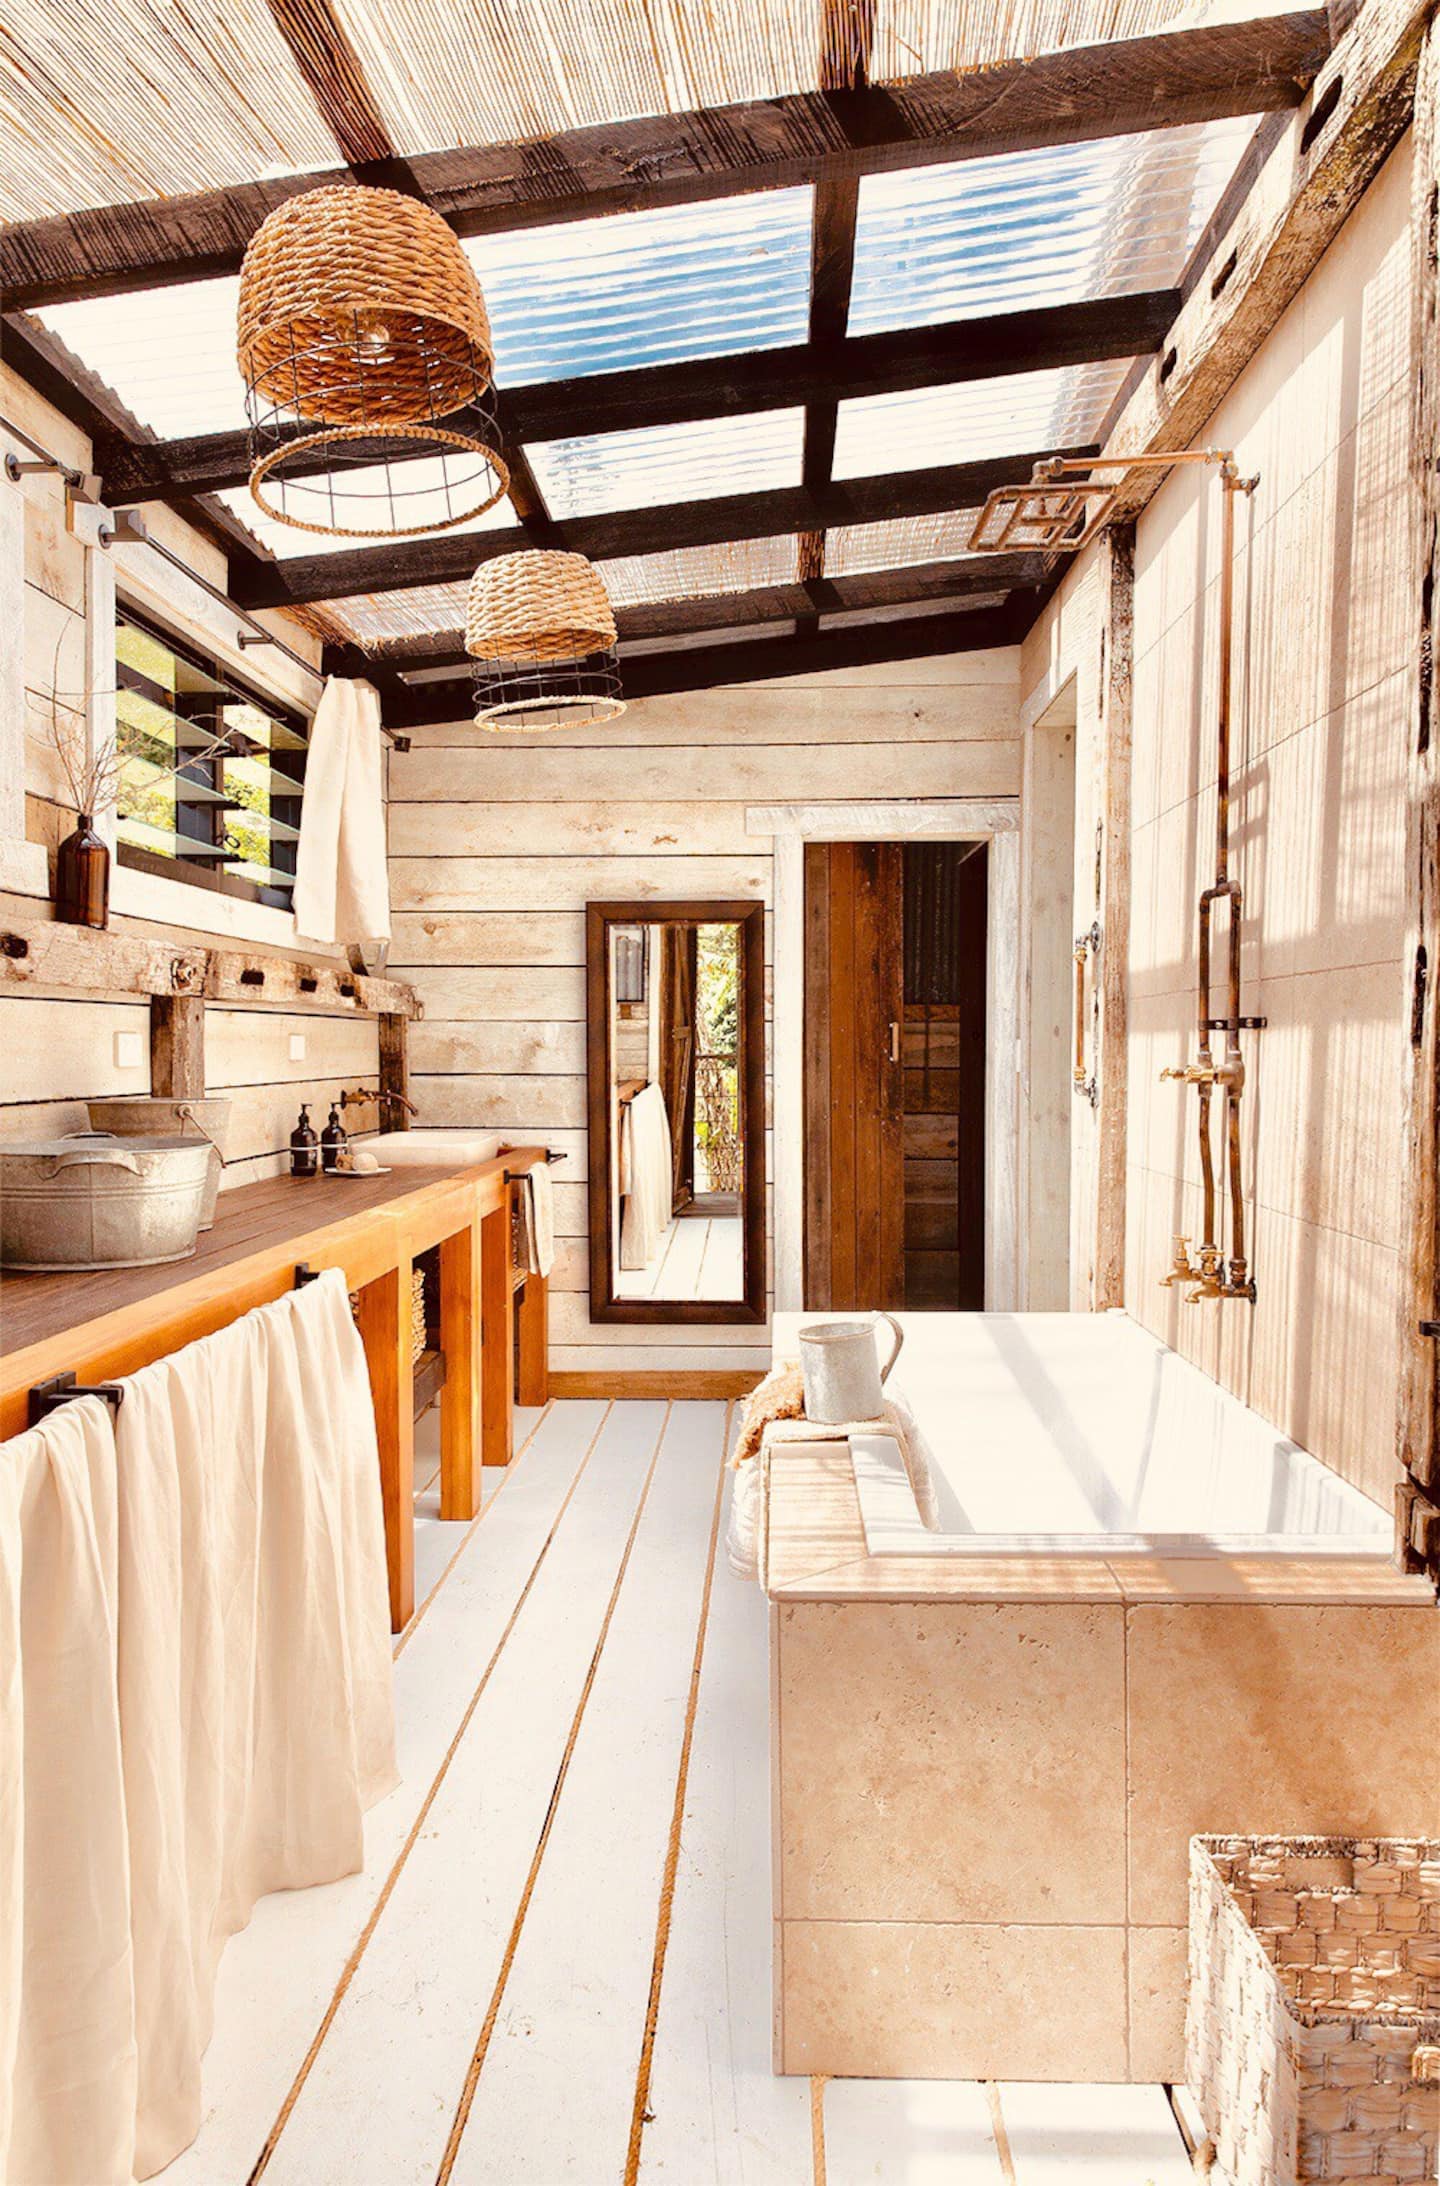 a bath in a shed style bathroom with a clear roof